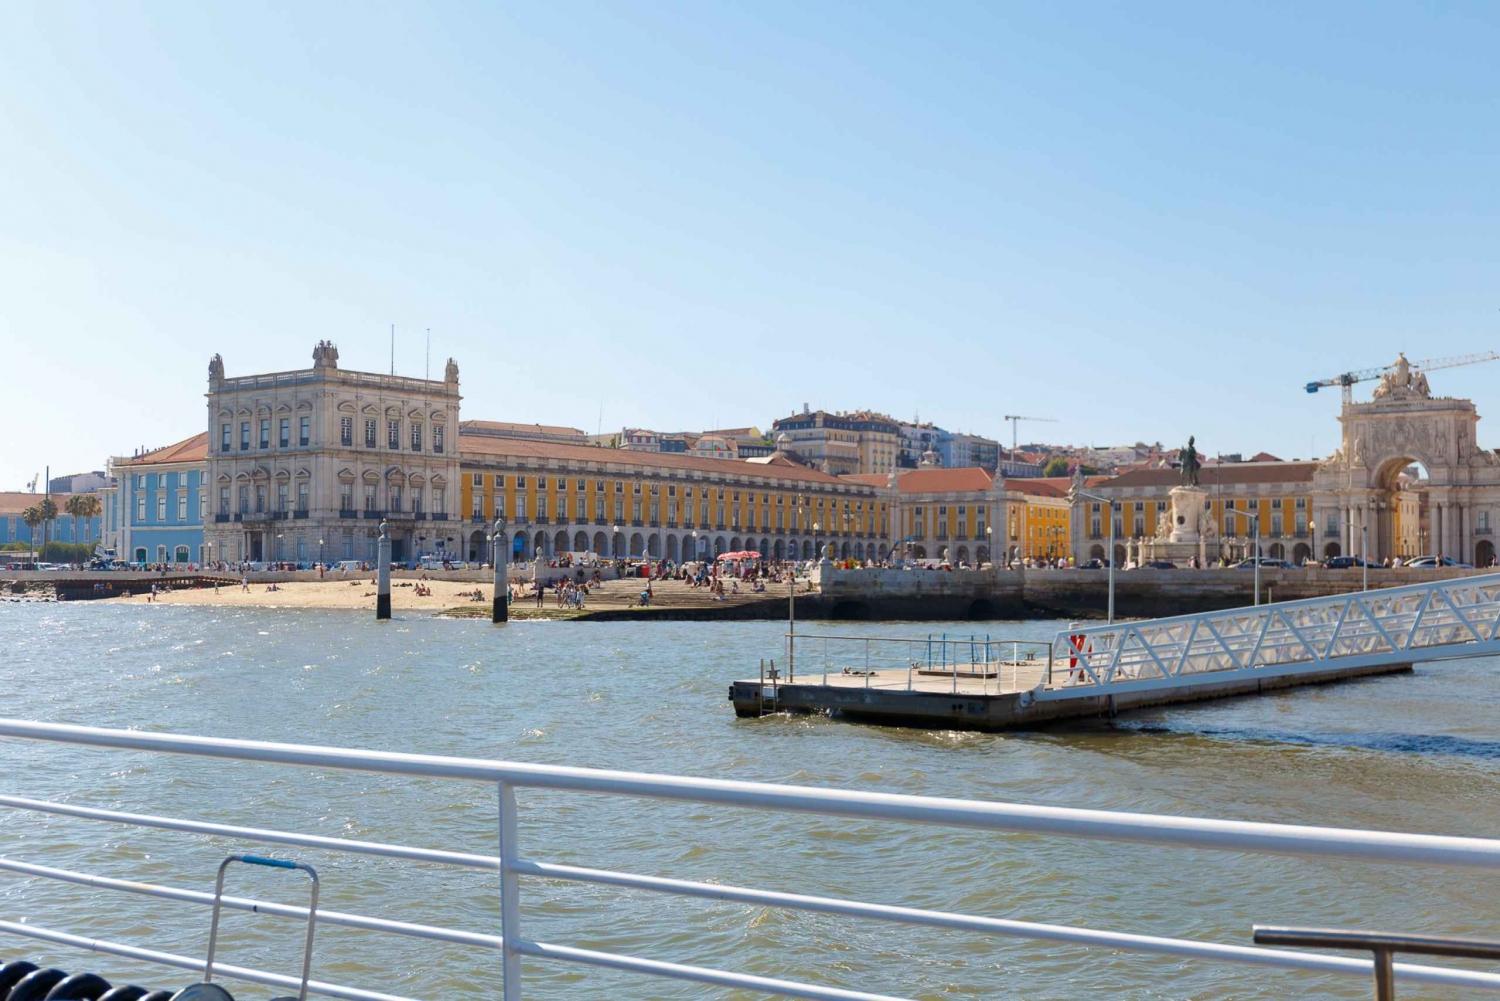 Lisbon: Tagus River Cruise With Brunch